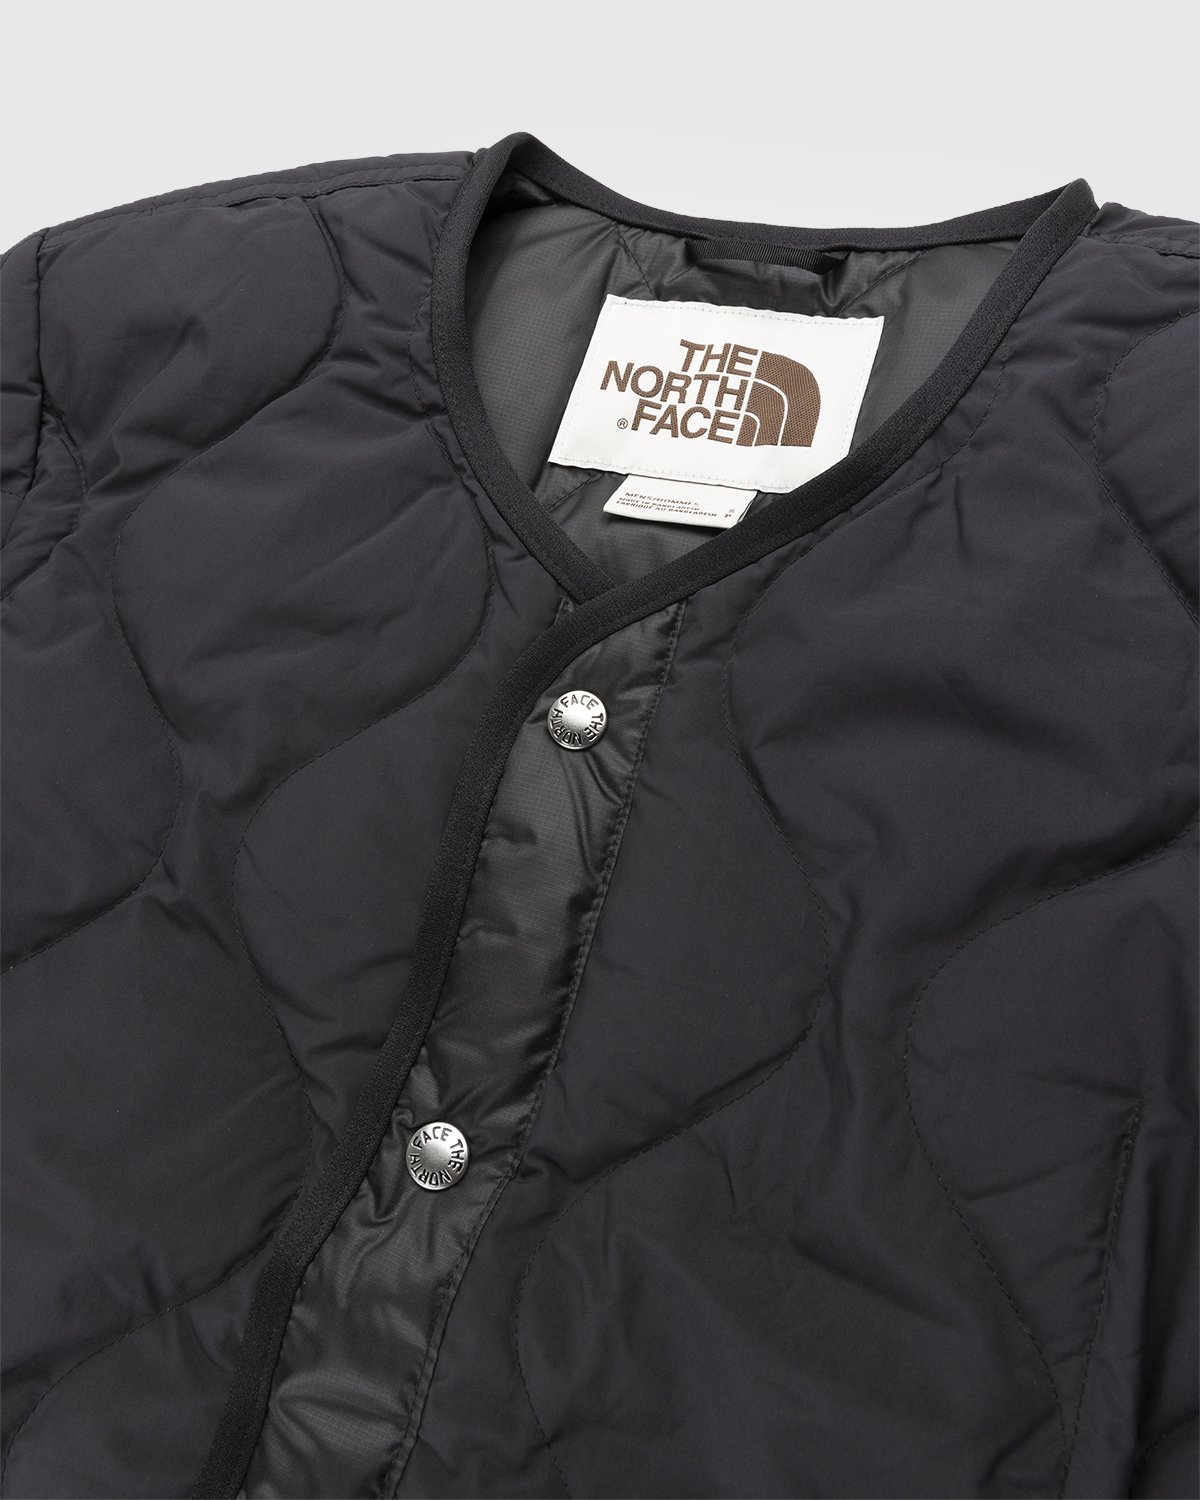 The North Face - M66 Down Jacket Black - Clothing - Black - Image 3